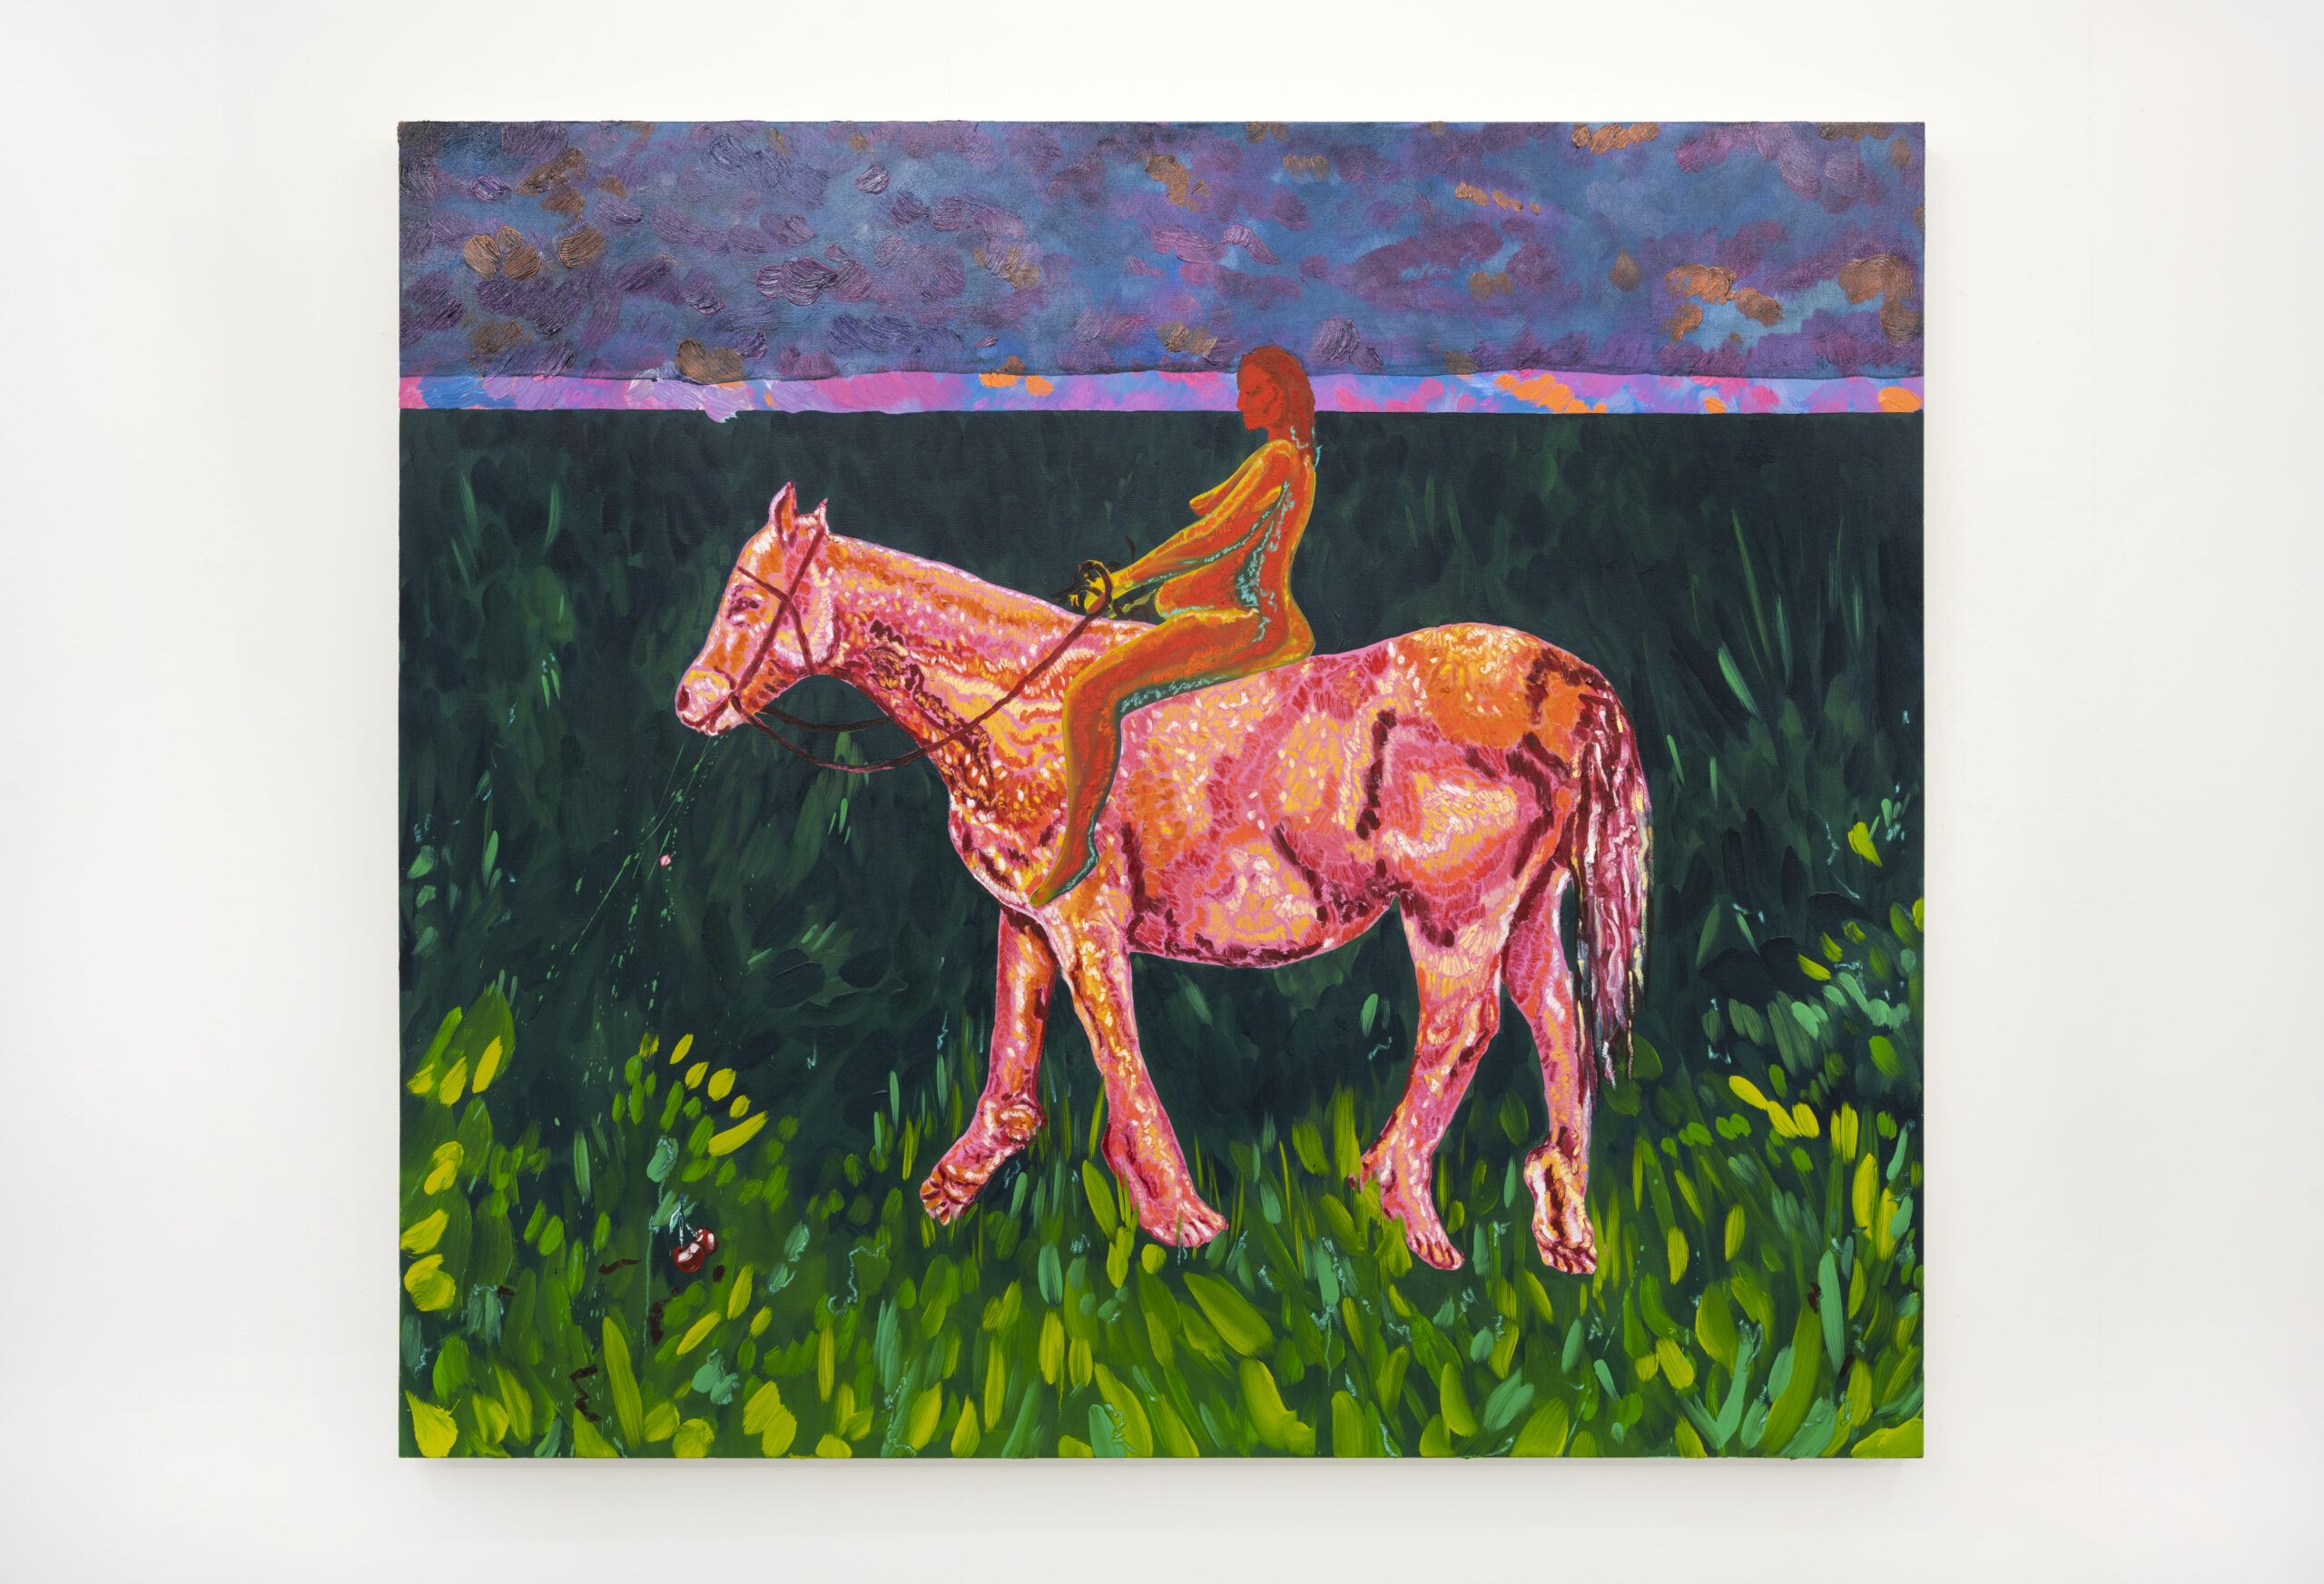 The orange figure of a womxn sits atop a pink horse that has human feet. The pair are moving through a green landscape, with two cherries visible in the left foreground on the floor.